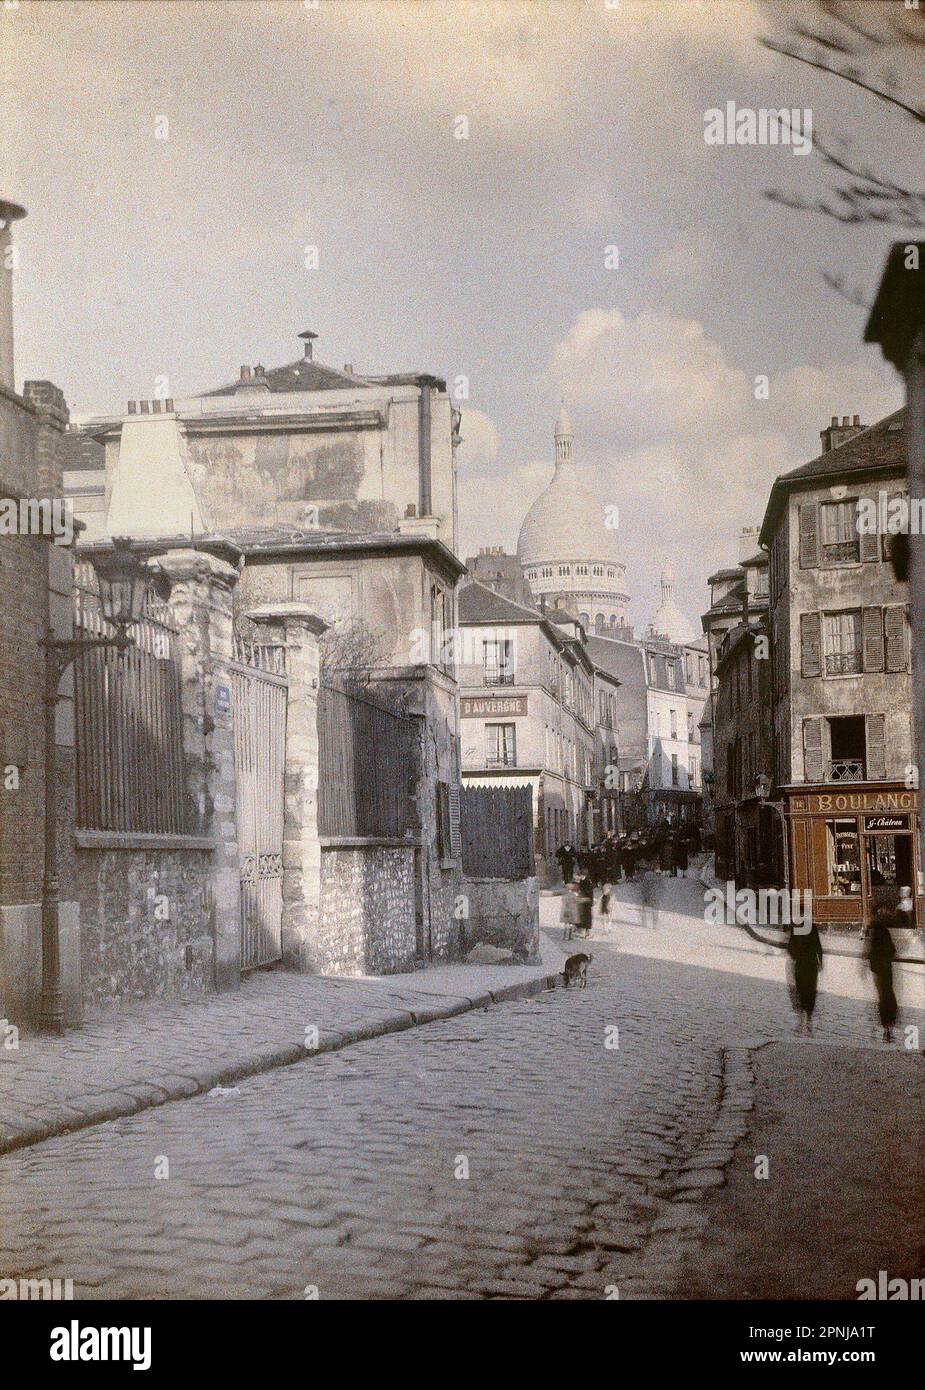 Photograph of the Basilica of the Sacred Heart of Montmartre seen from rue Norvins in the 18th arrondissement of Paris around 1915 - 1925, Musée Carnavalet de Paris Stock Photo